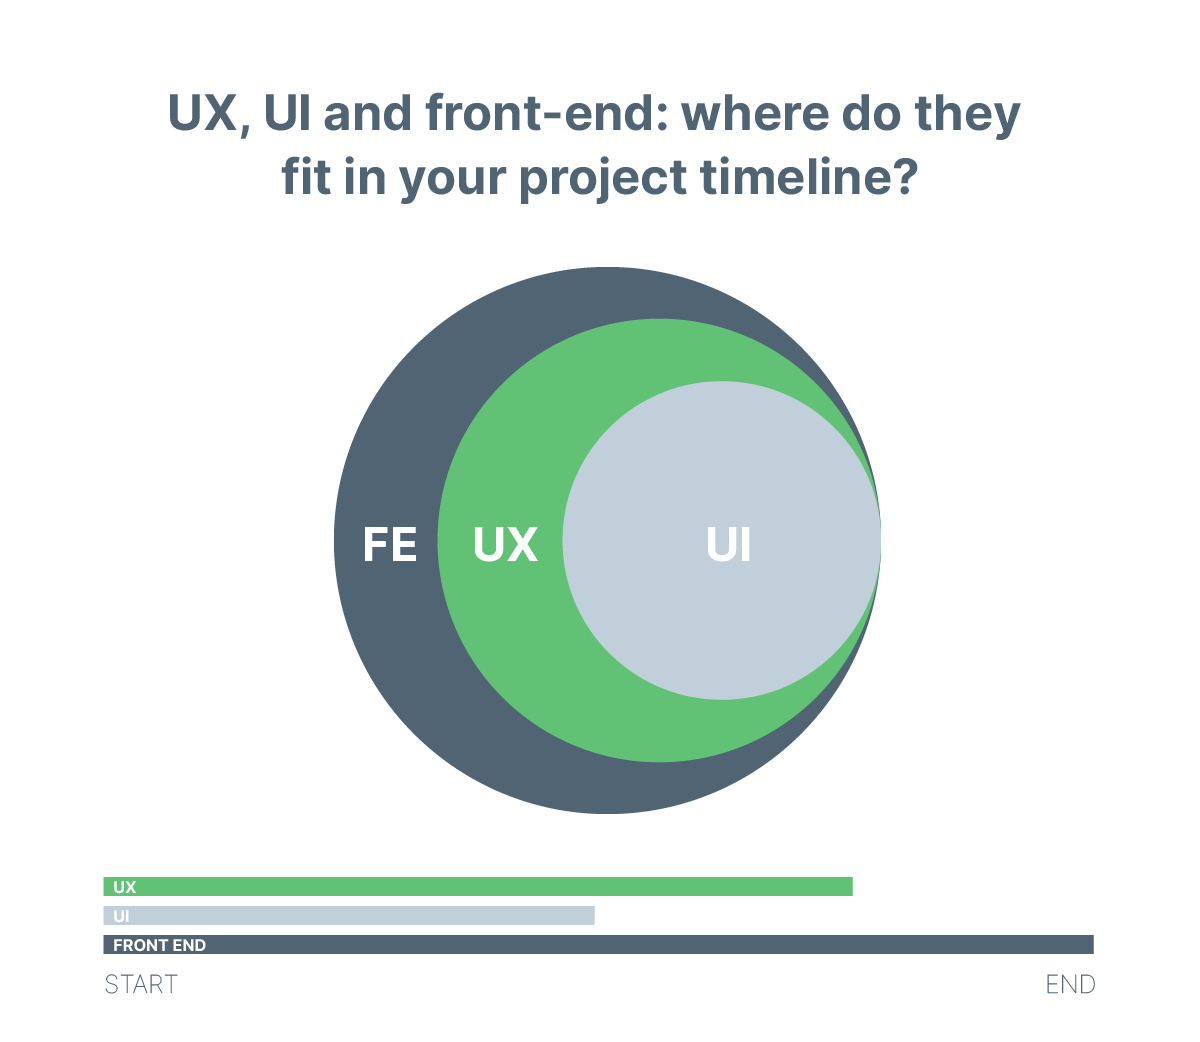 ux ui and frontend timeline